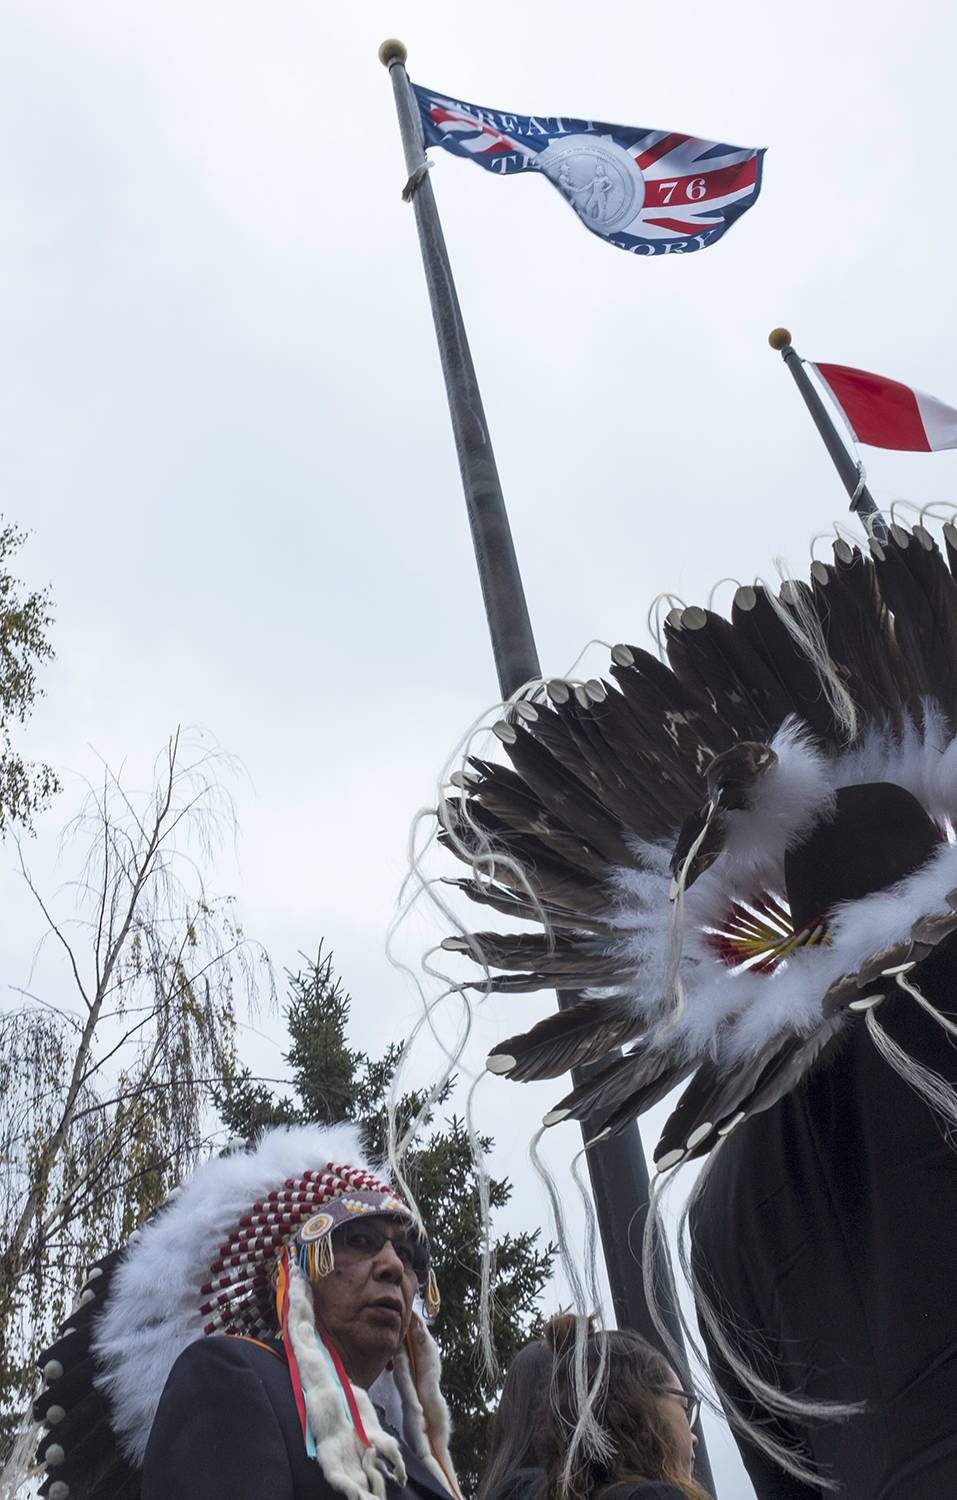 Chiefs’ eagle feathers make for a backdrop to the Treaty 6 flag, which stands aloft at the WCPS district office in Ponoka.